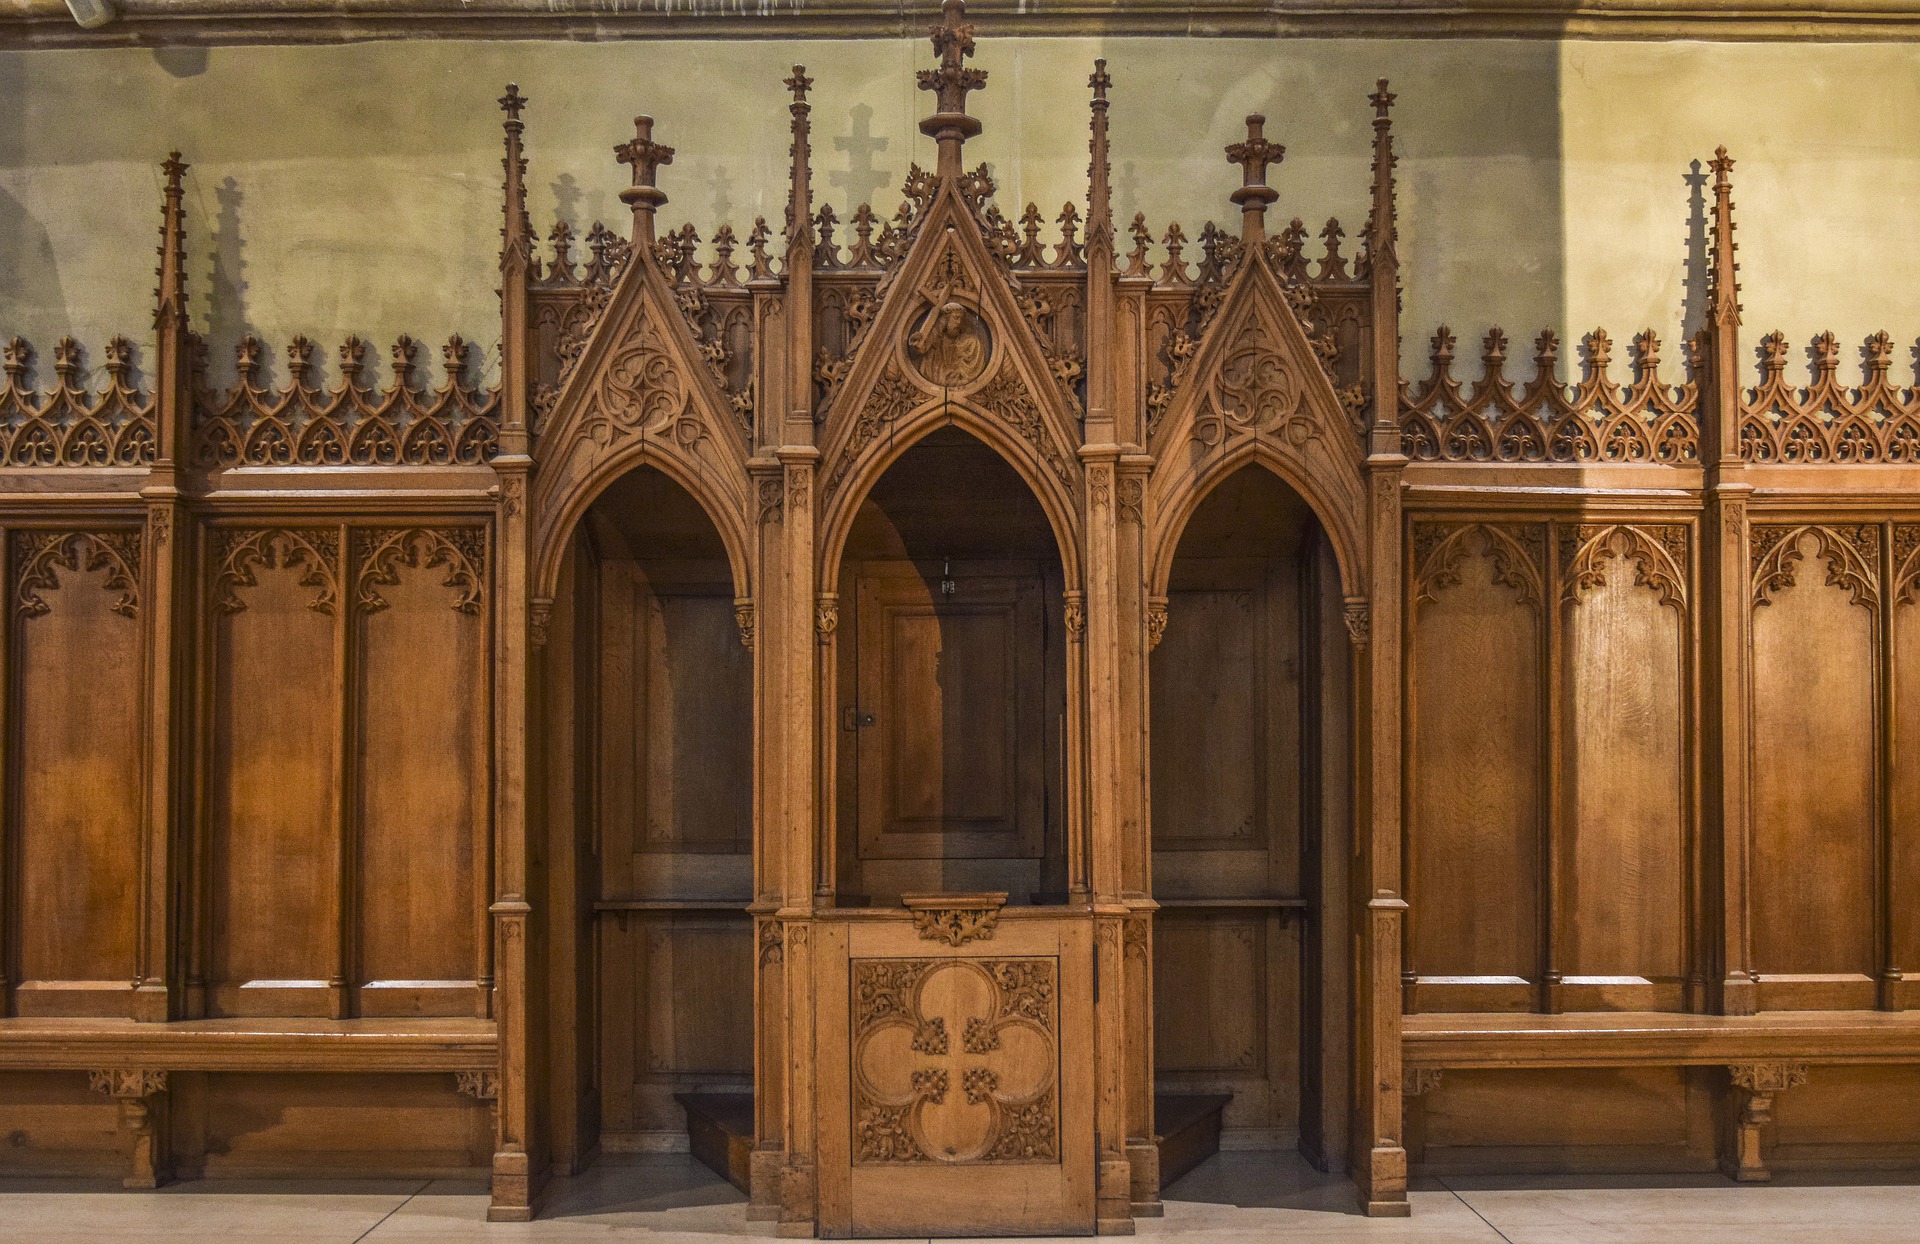 This images displays a wooden confession booth